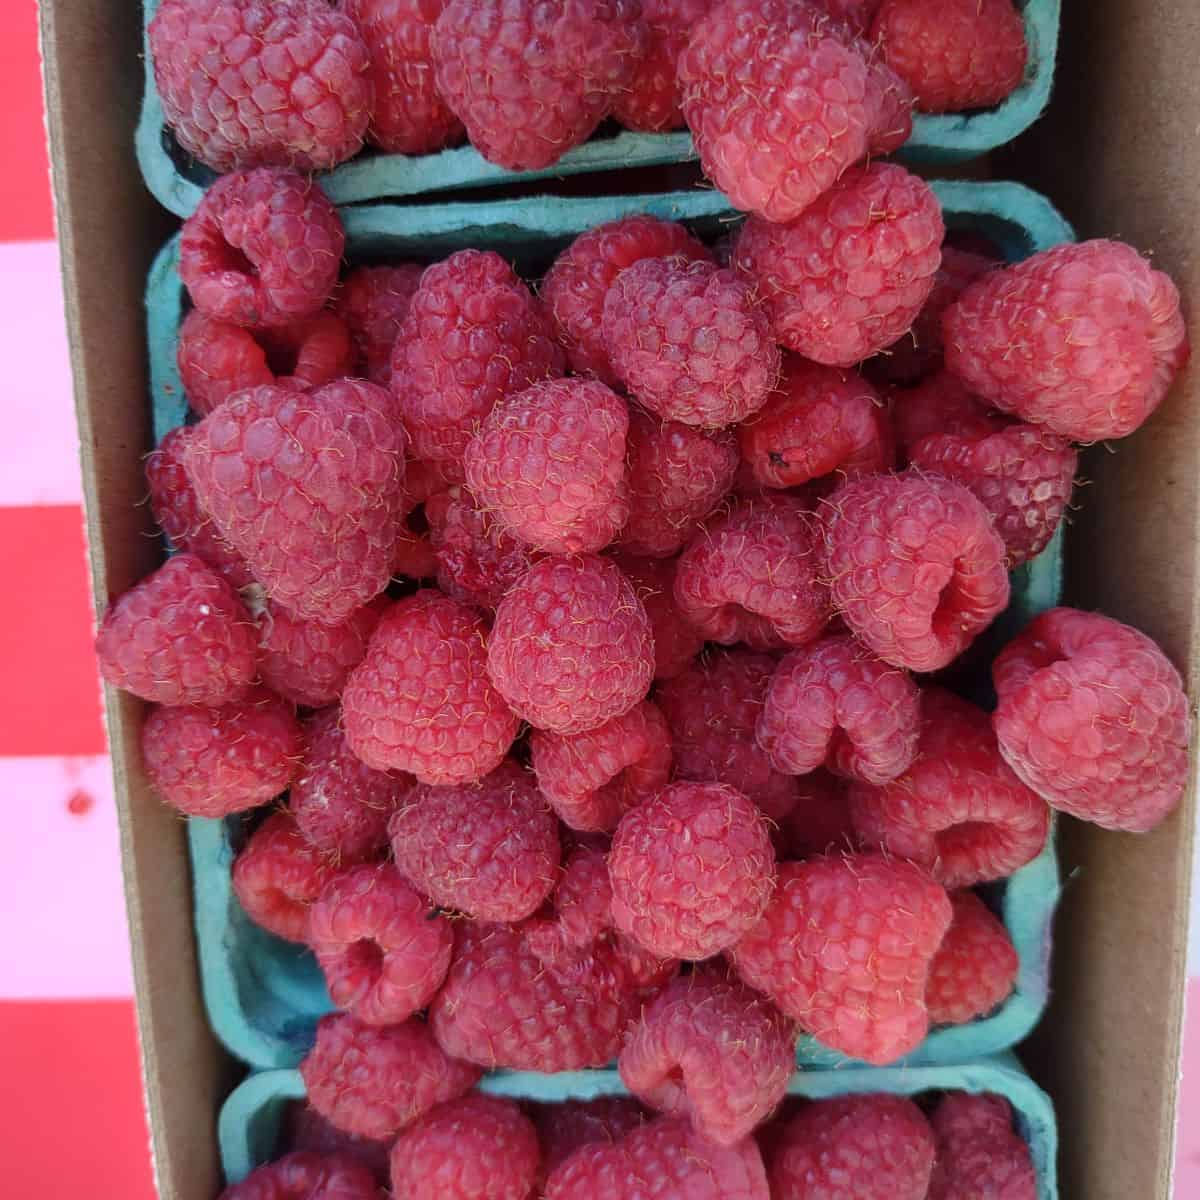 Red raspberries in 3 containers at a farmer's market.